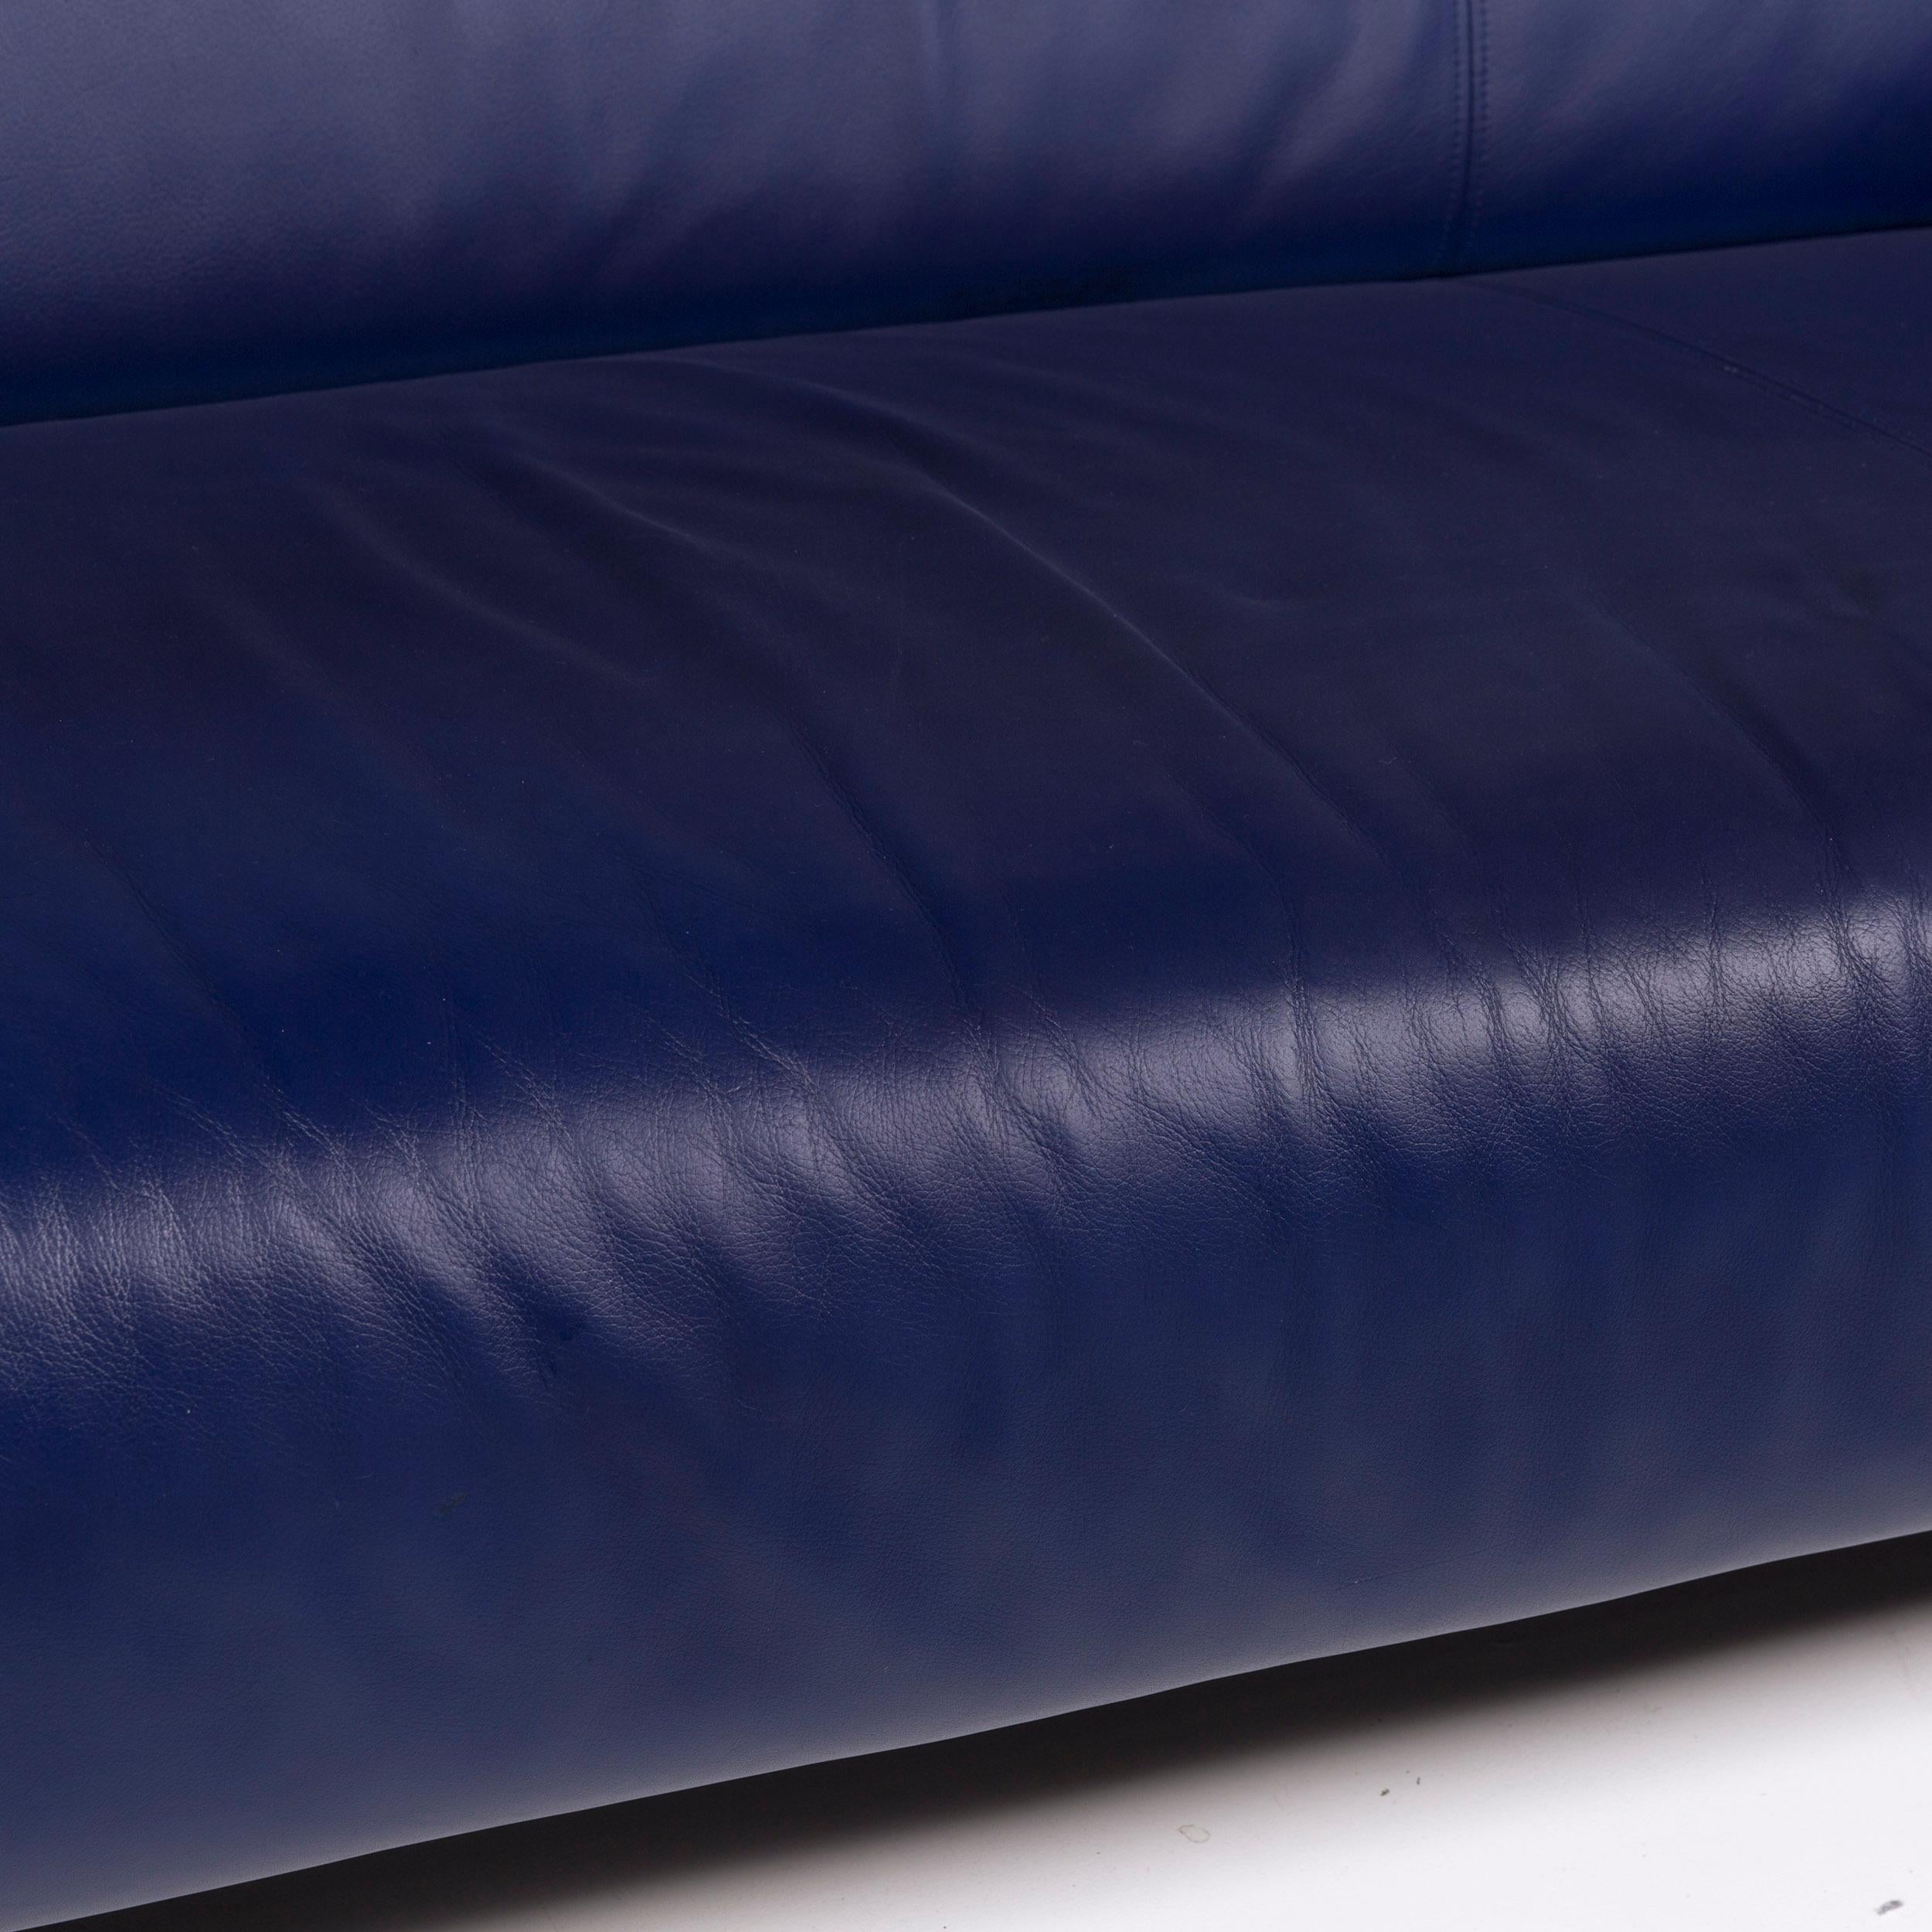 We bring to you a Rolf Benz 322 leather sofa blue three-seat couch.
 

Product measurements in centimetres:
 

Depth 92
Width 209
Height 72
Seat-height 41
Rest-height 69
Seat-depth 59
Seat-width 140
Back-height 37.
  